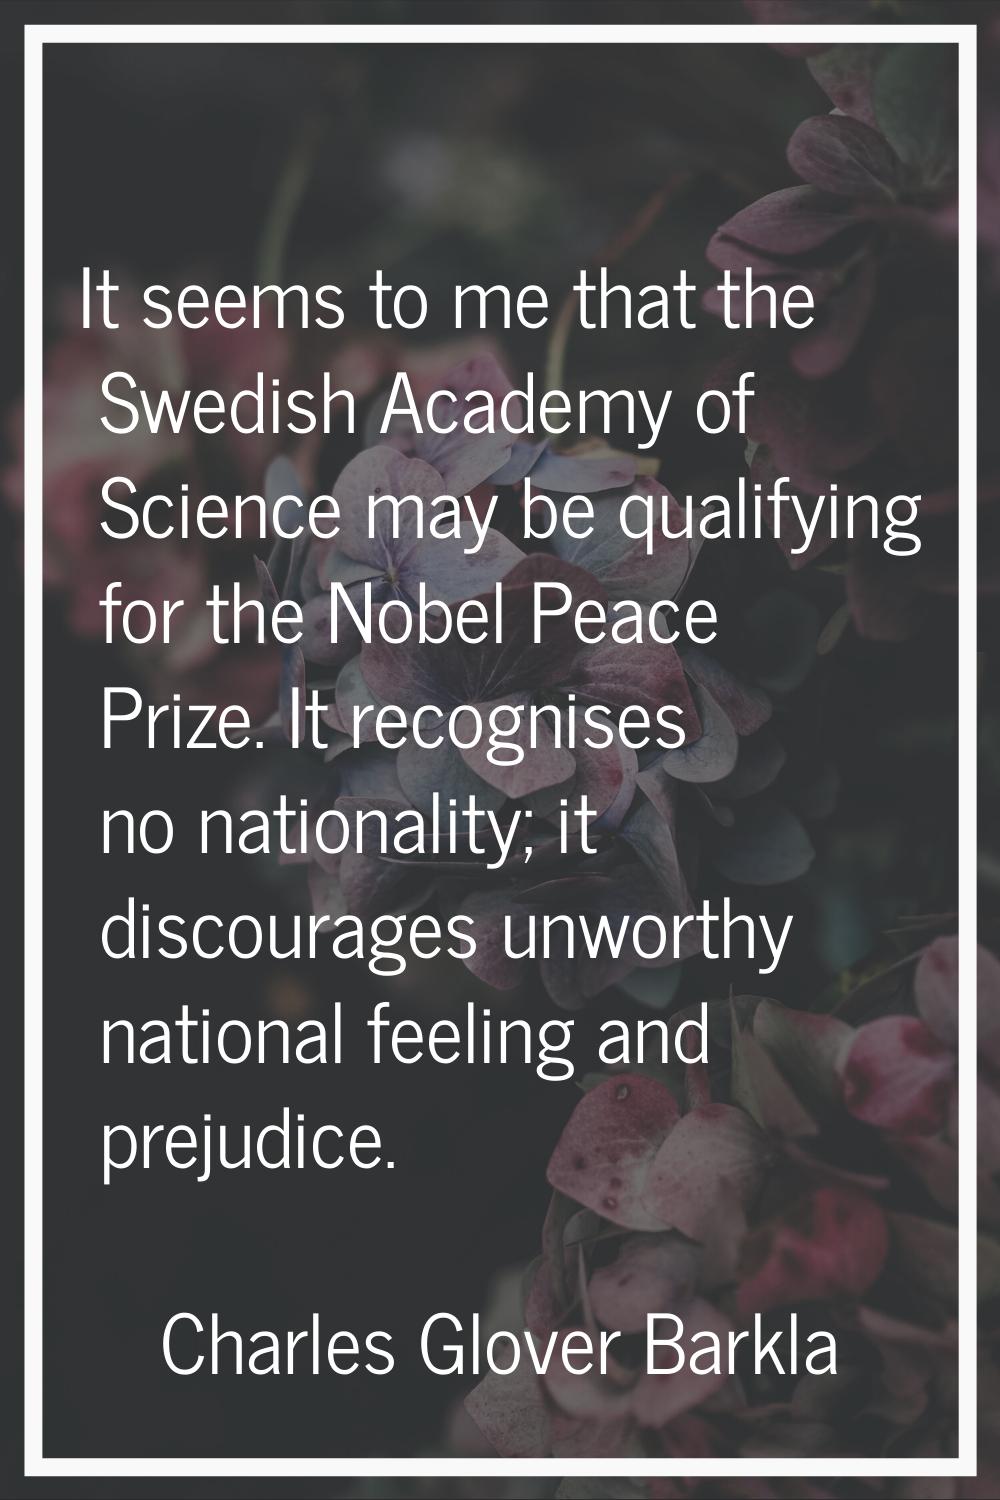 It seems to me that the Swedish Academy of Science may be qualifying for the Nobel Peace Prize. It 